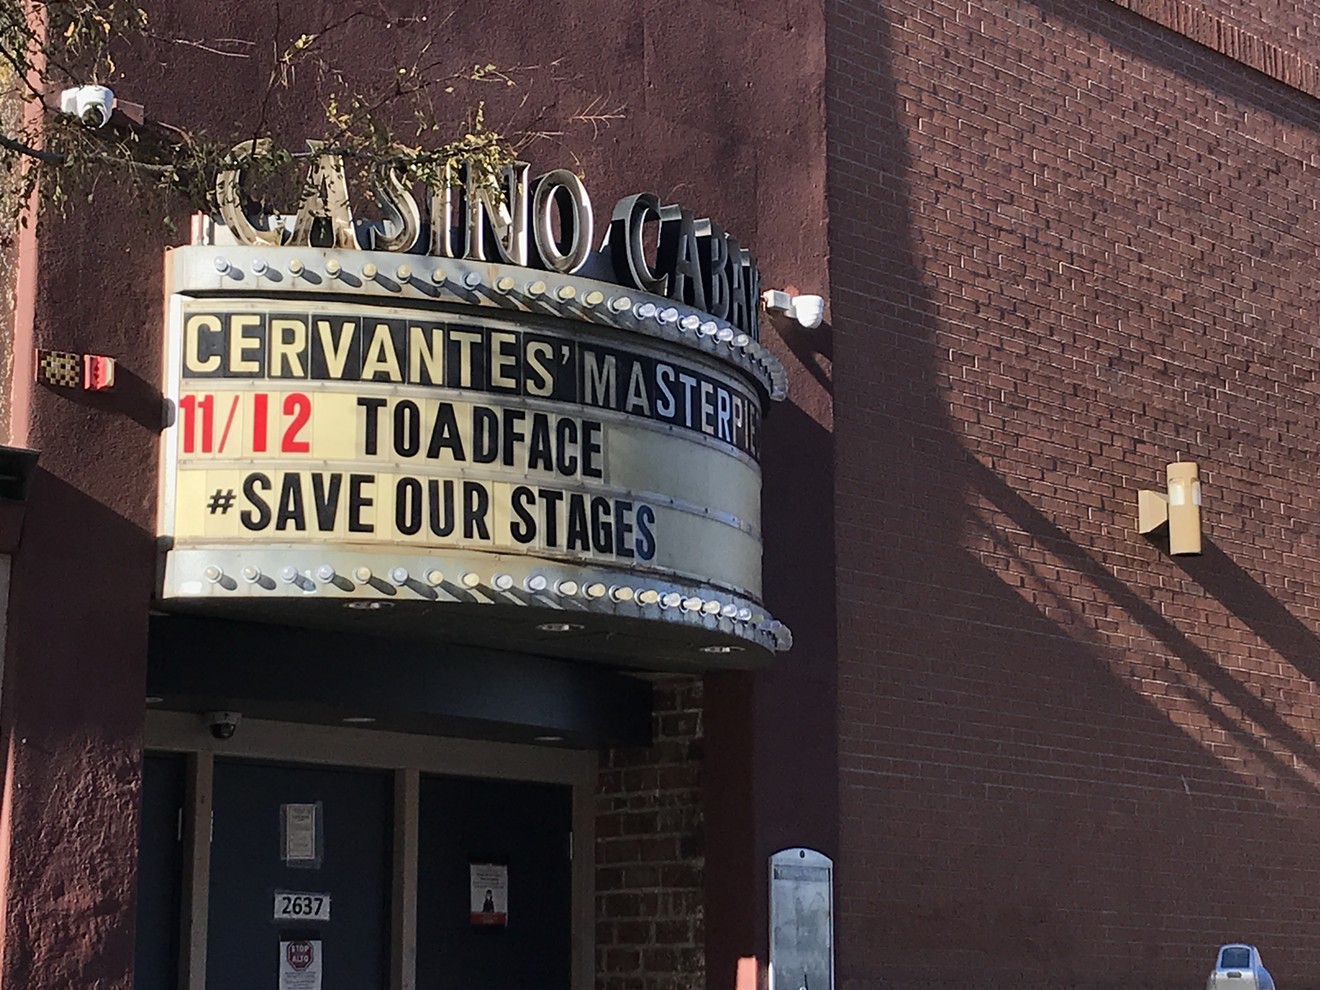 Cervantes' Masterpiece Ballroom reopens this weekend.